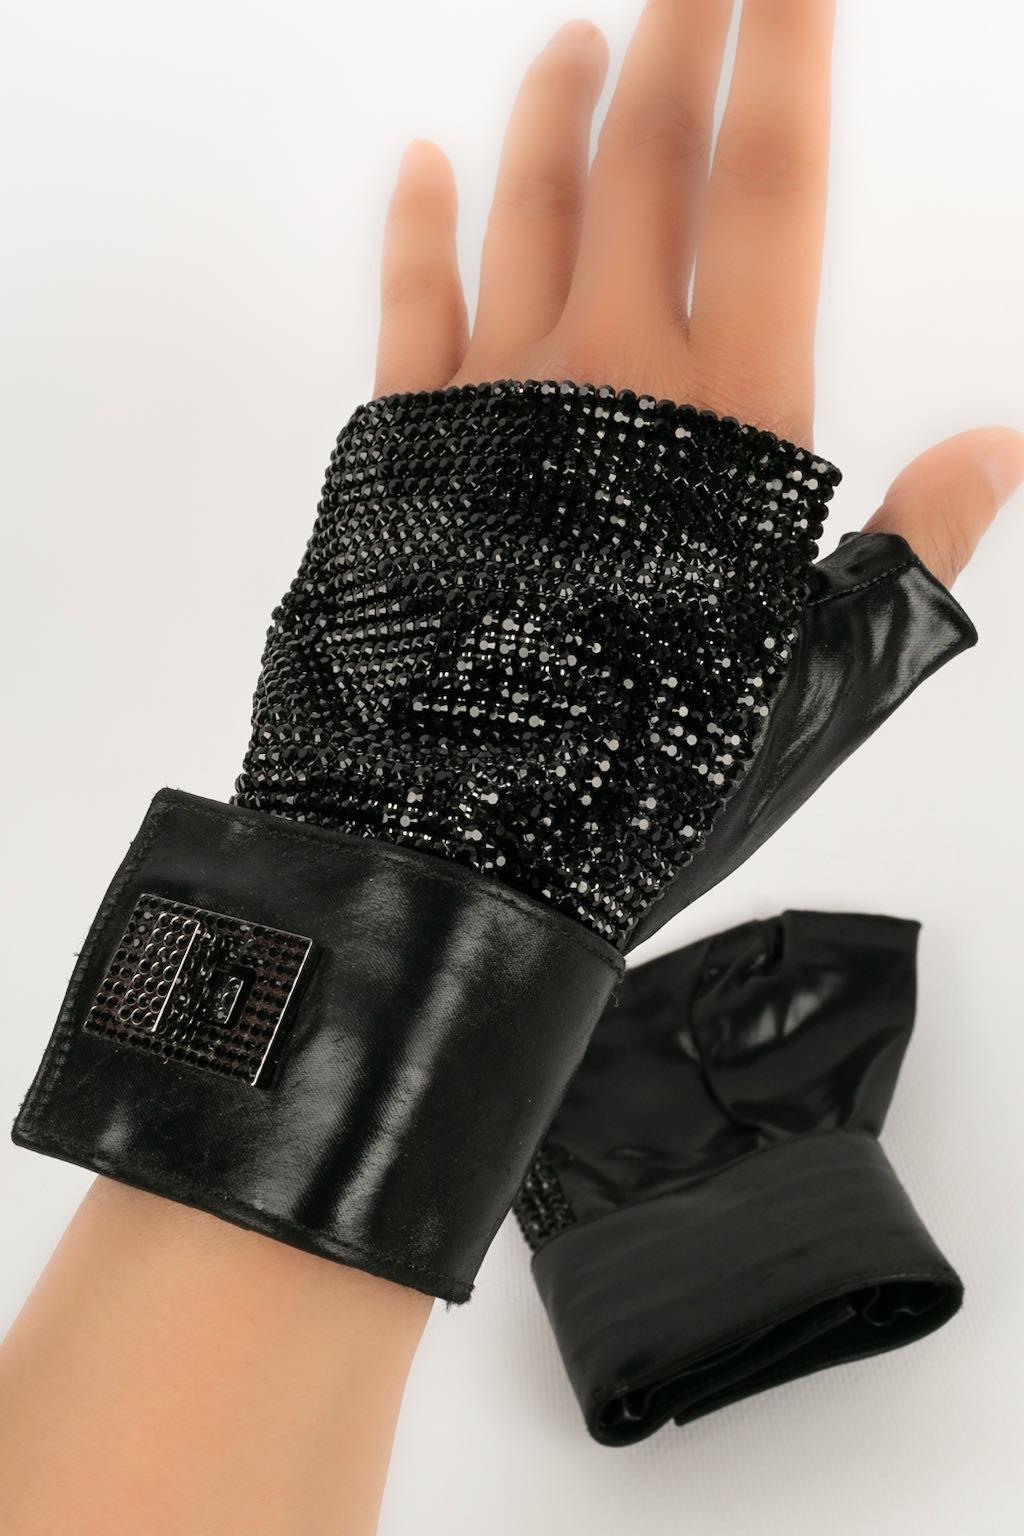 Swarovski - (Made in France) Leather mittens paved with black Swarovski rhinestones.

Additional information:
Condition: Very good condition
Dimensions: Height: 13 cm

Seller Reference: ACC65